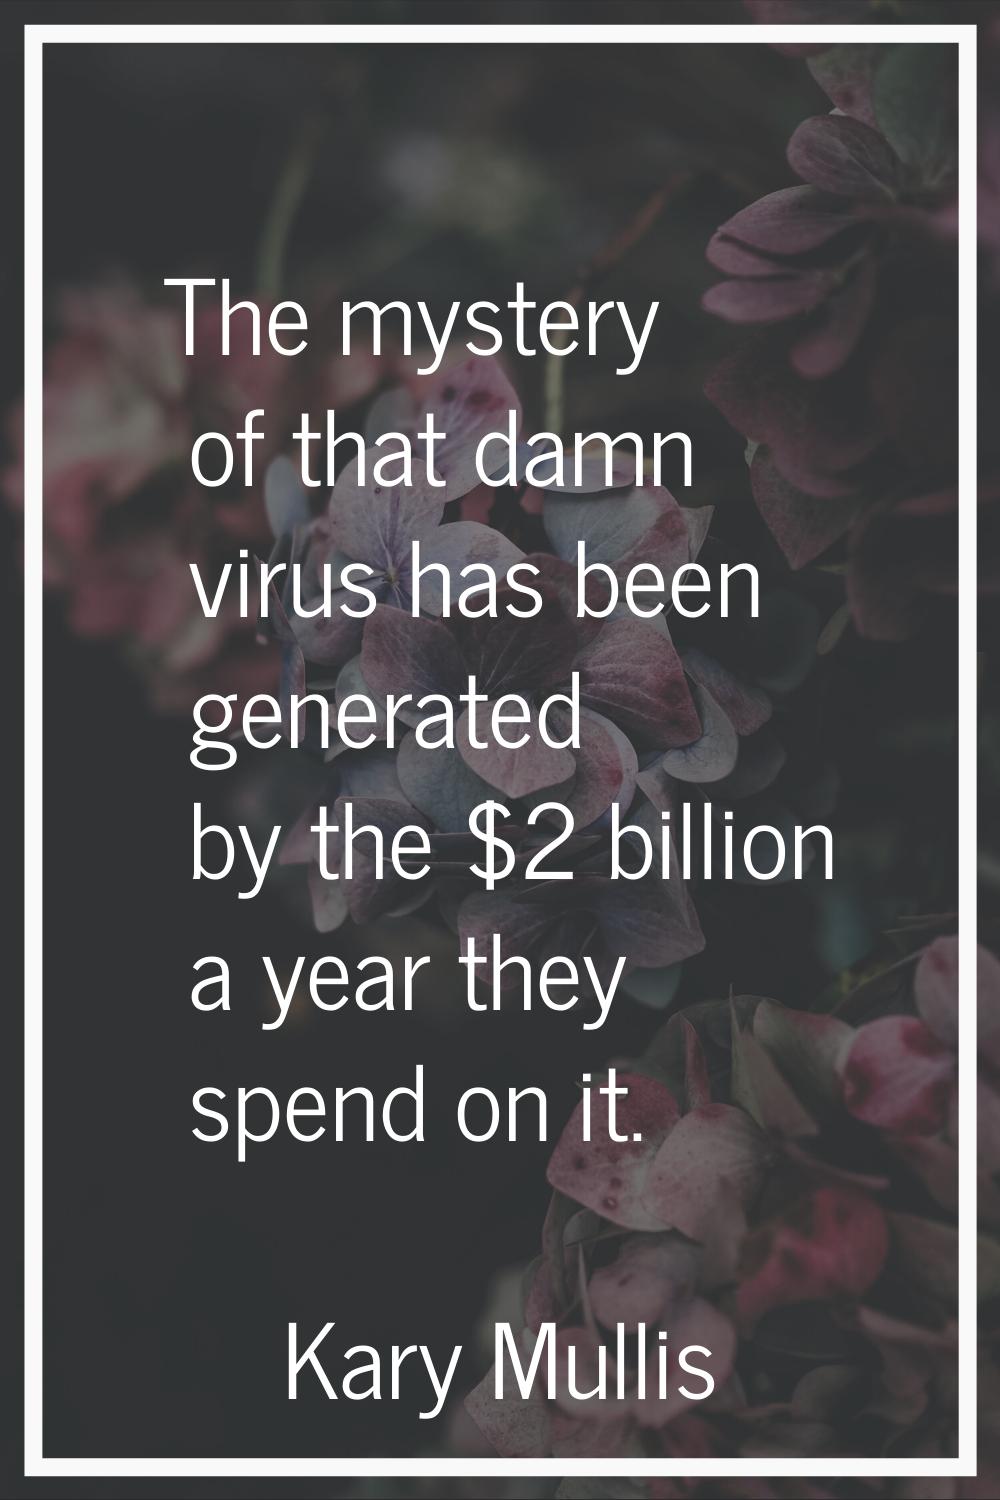 The mystery of that damn virus has been generated by the $2 billion a year they spend on it.